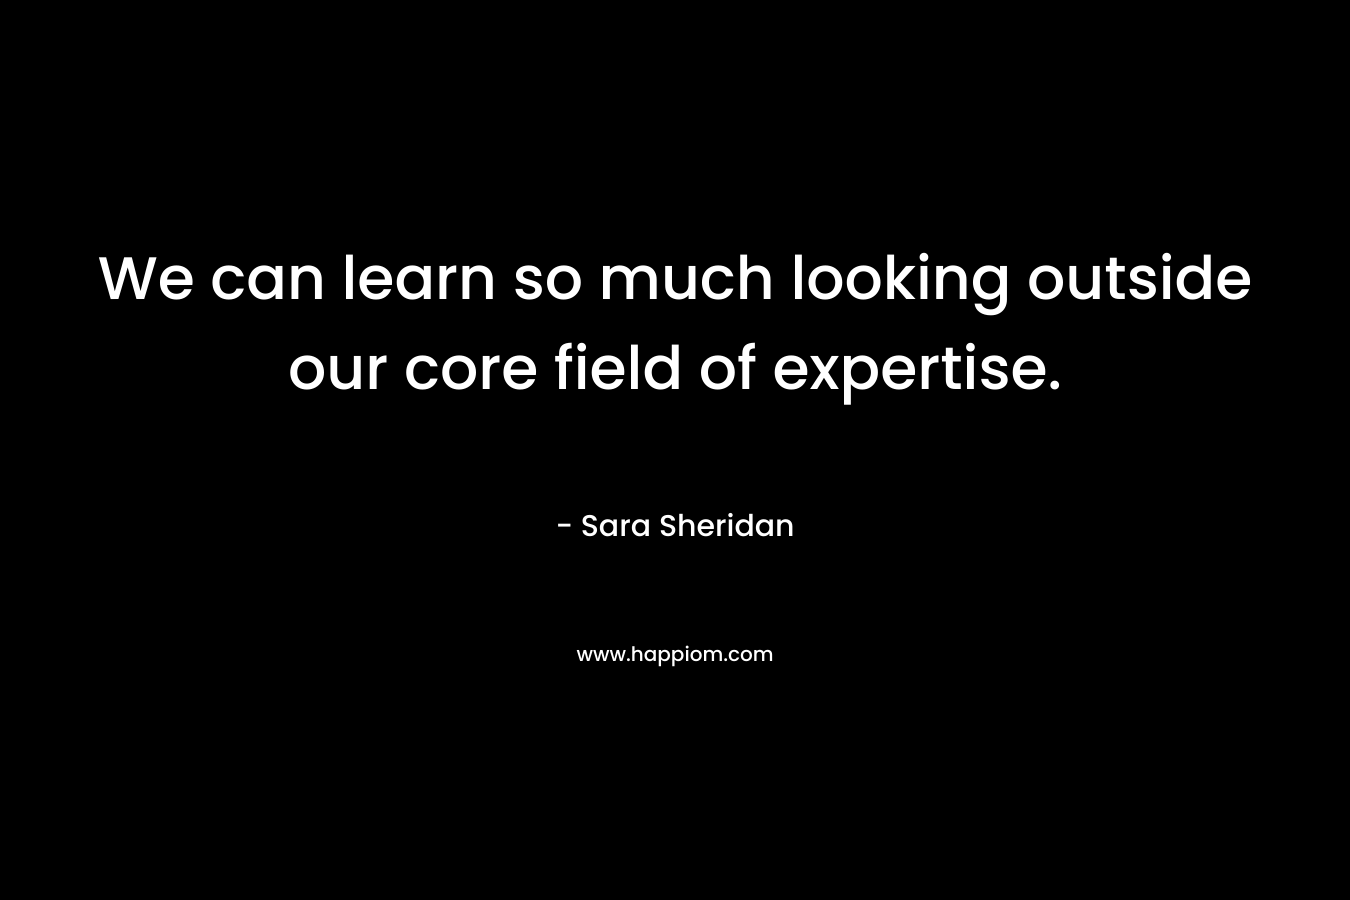 We can learn so much looking outside our core field of expertise.